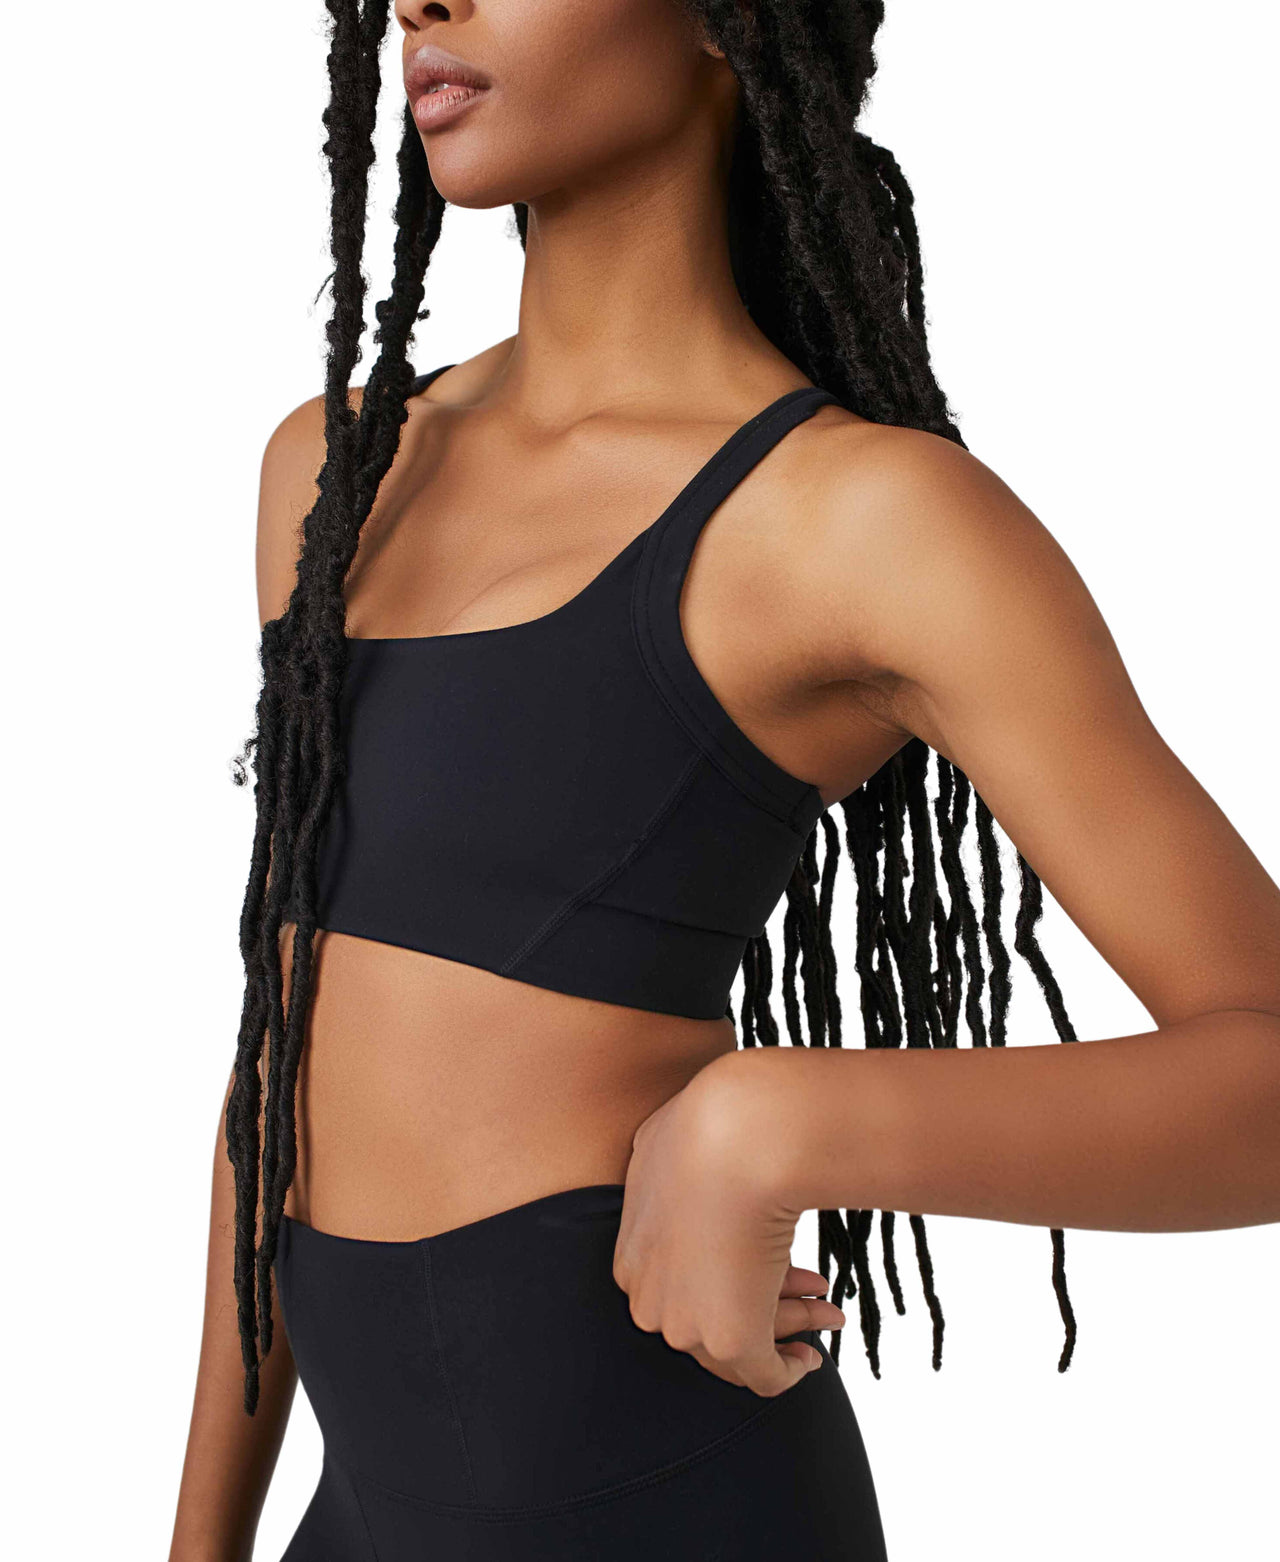 Free People - Never Better Square Neck Bra